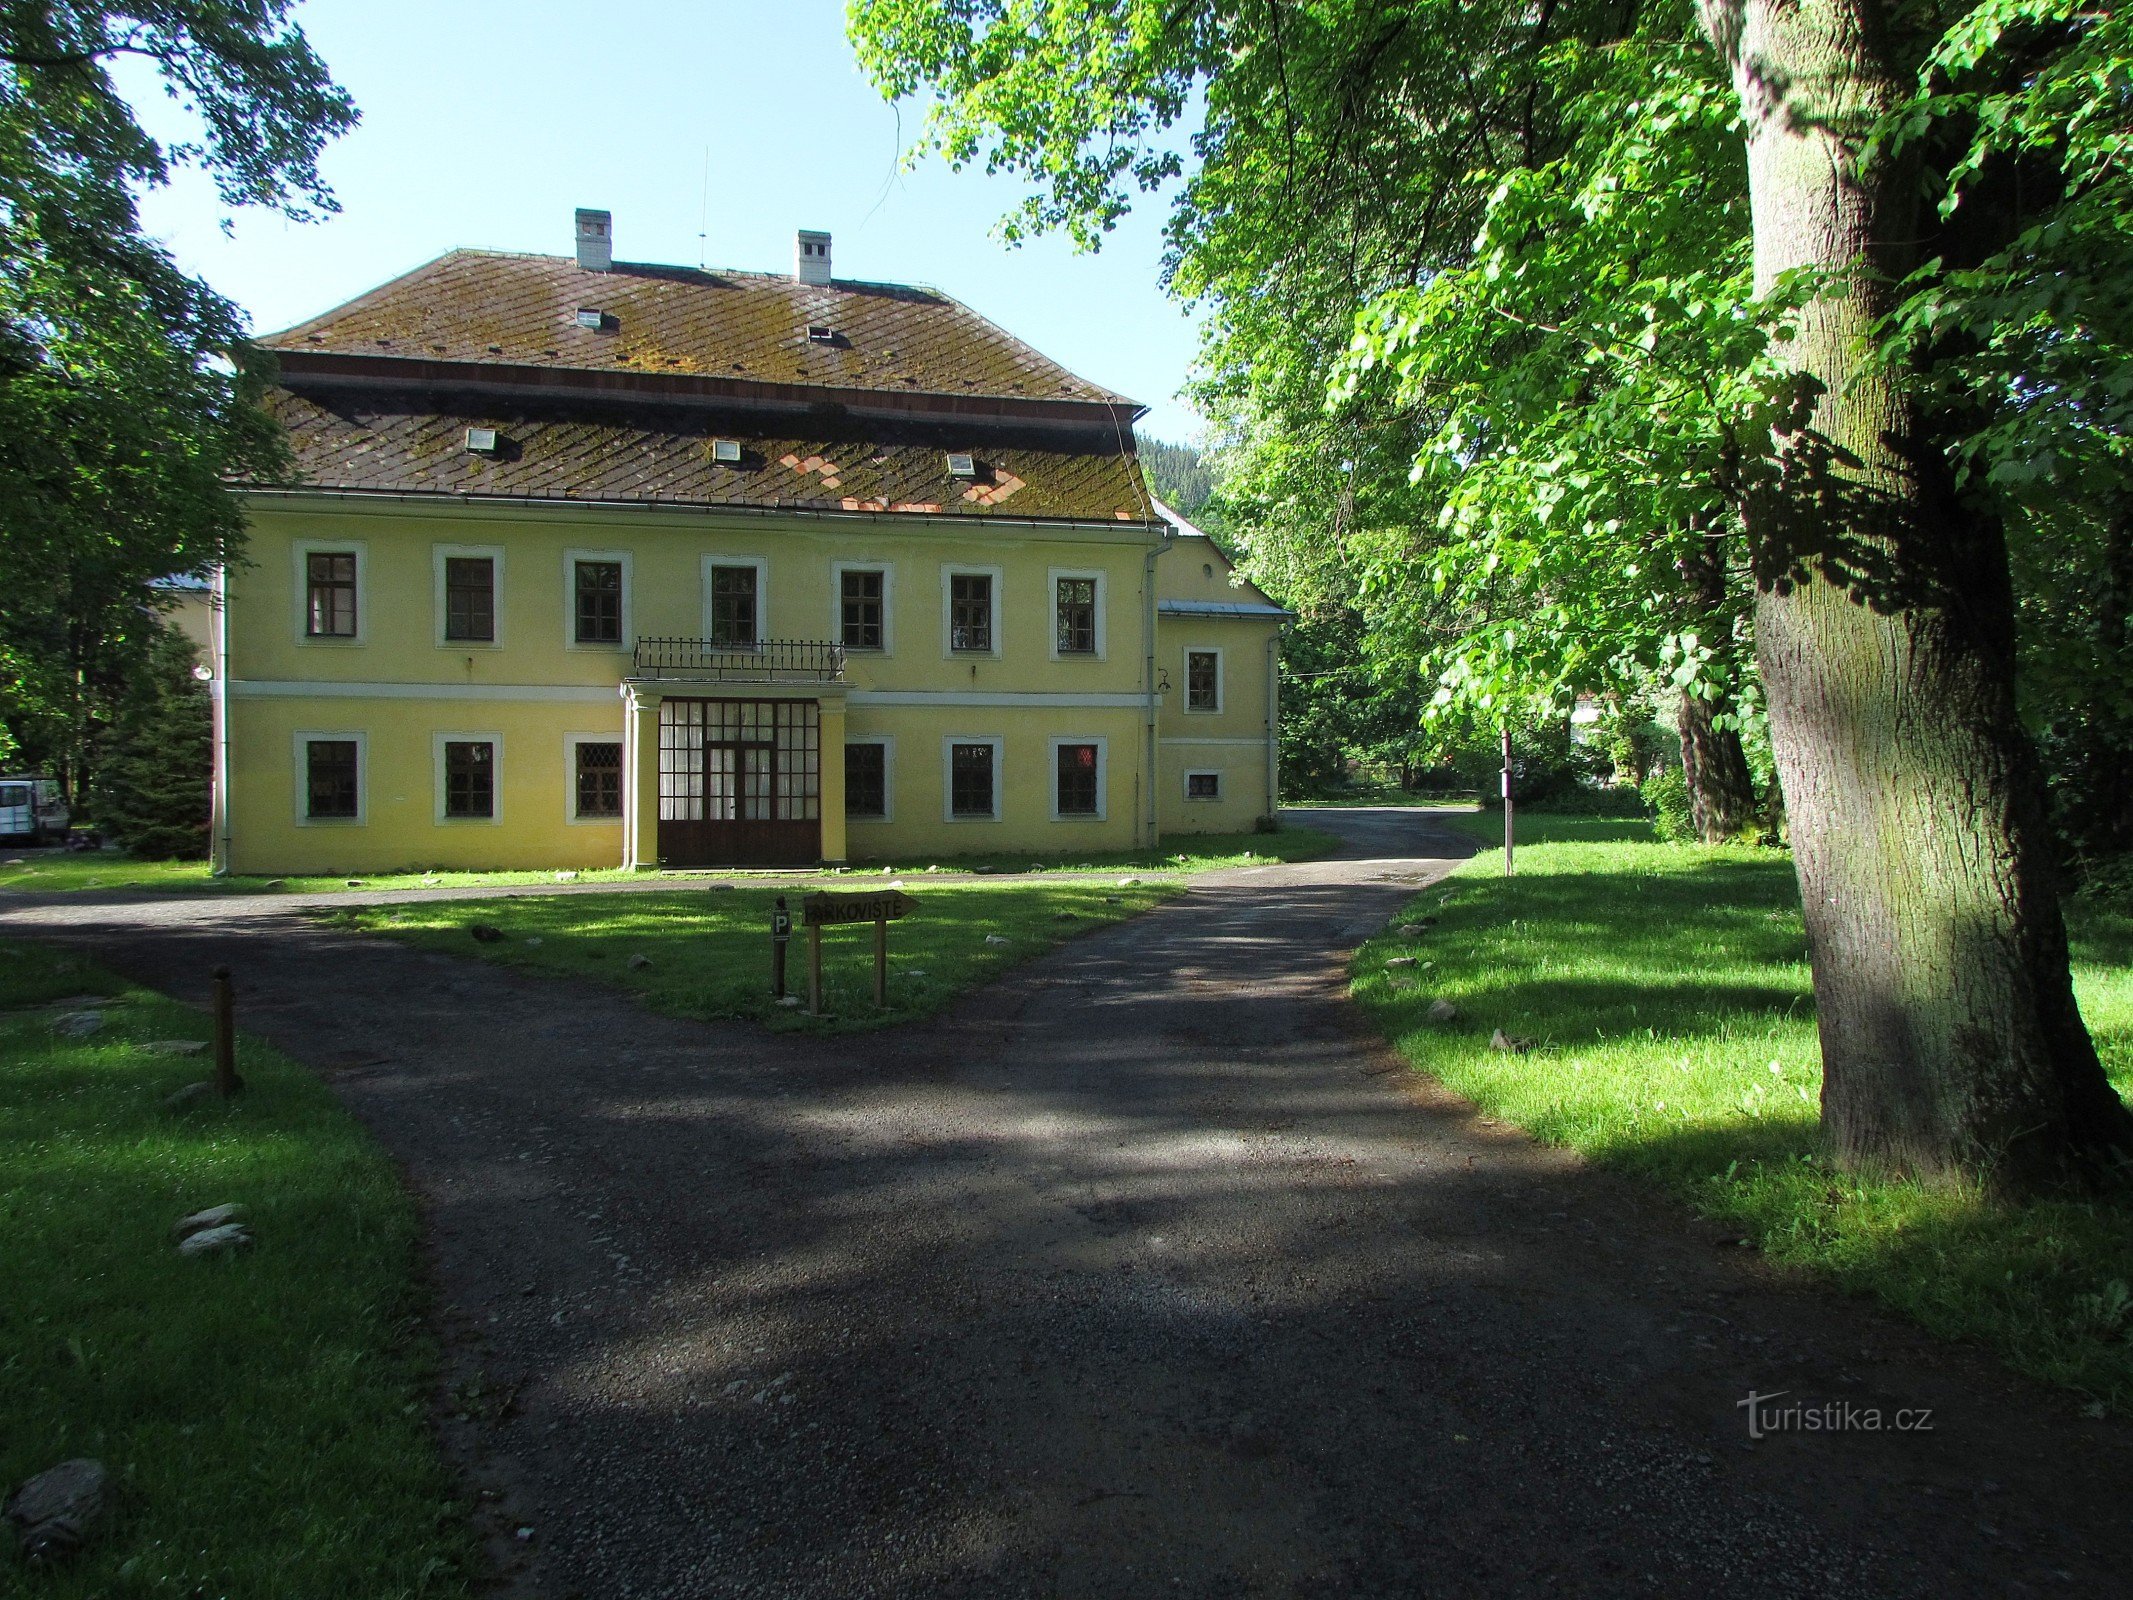 Grohmann chateau - nyt guesthouse